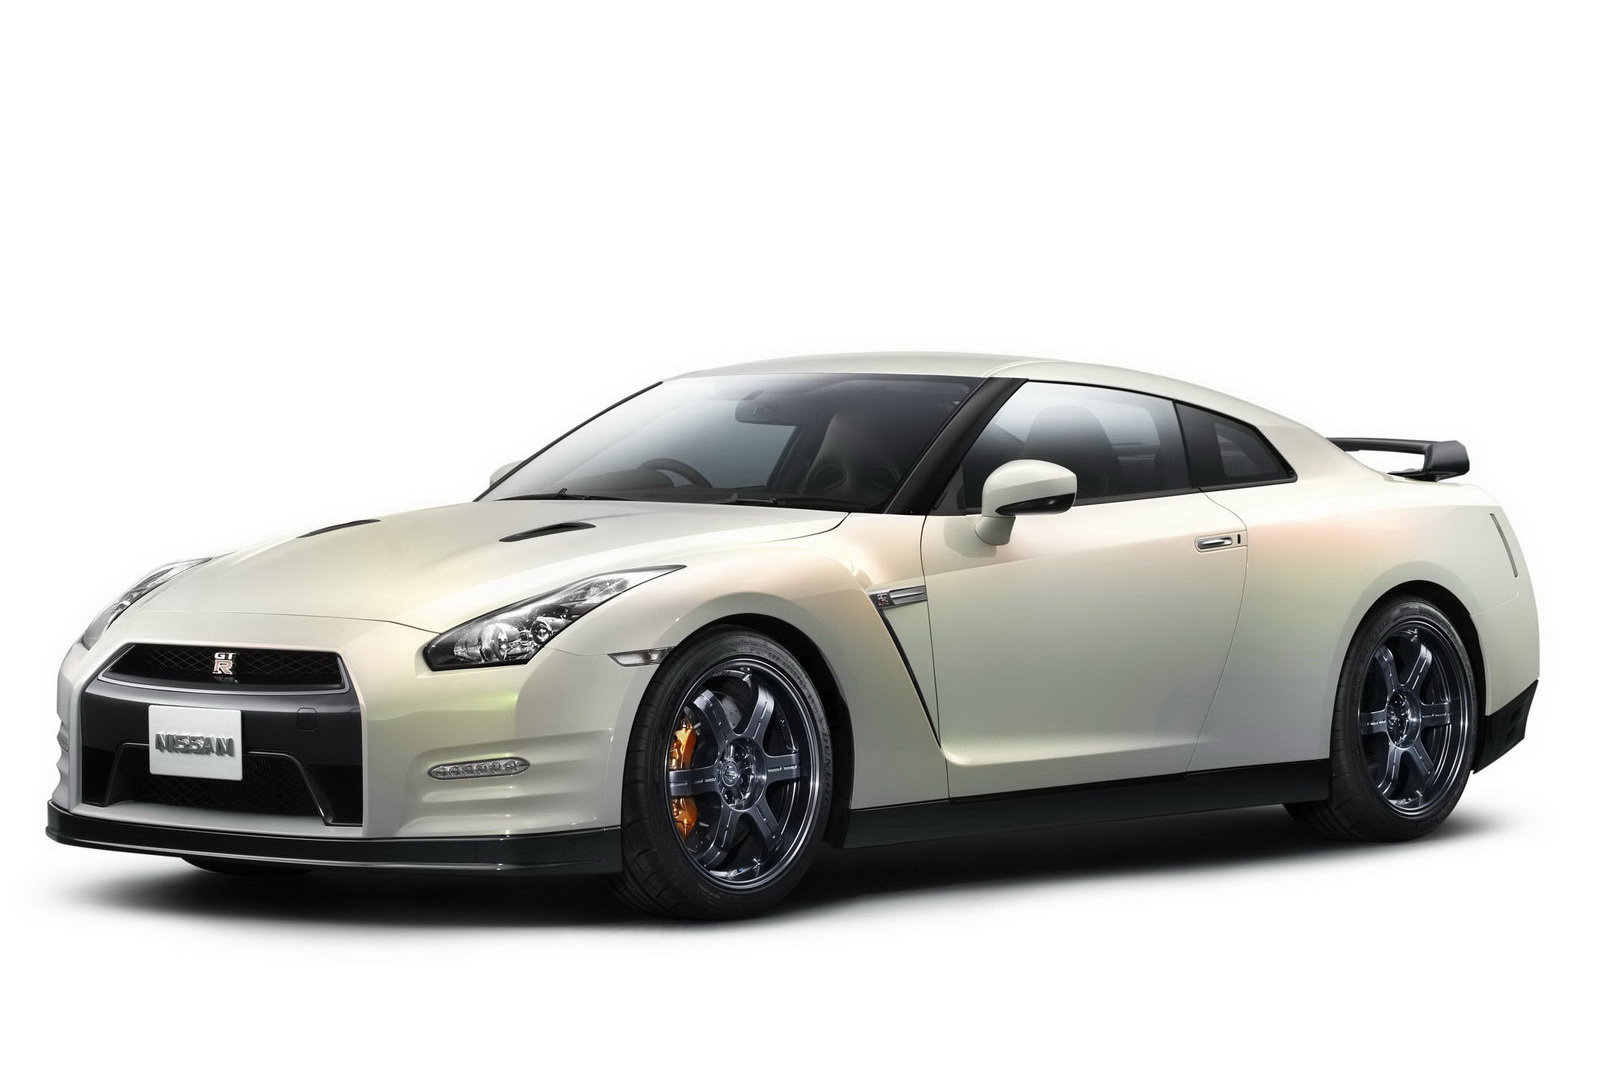 2011 Nissan GT-R EGOIST: Special Edition Caters to Luxury Seekers